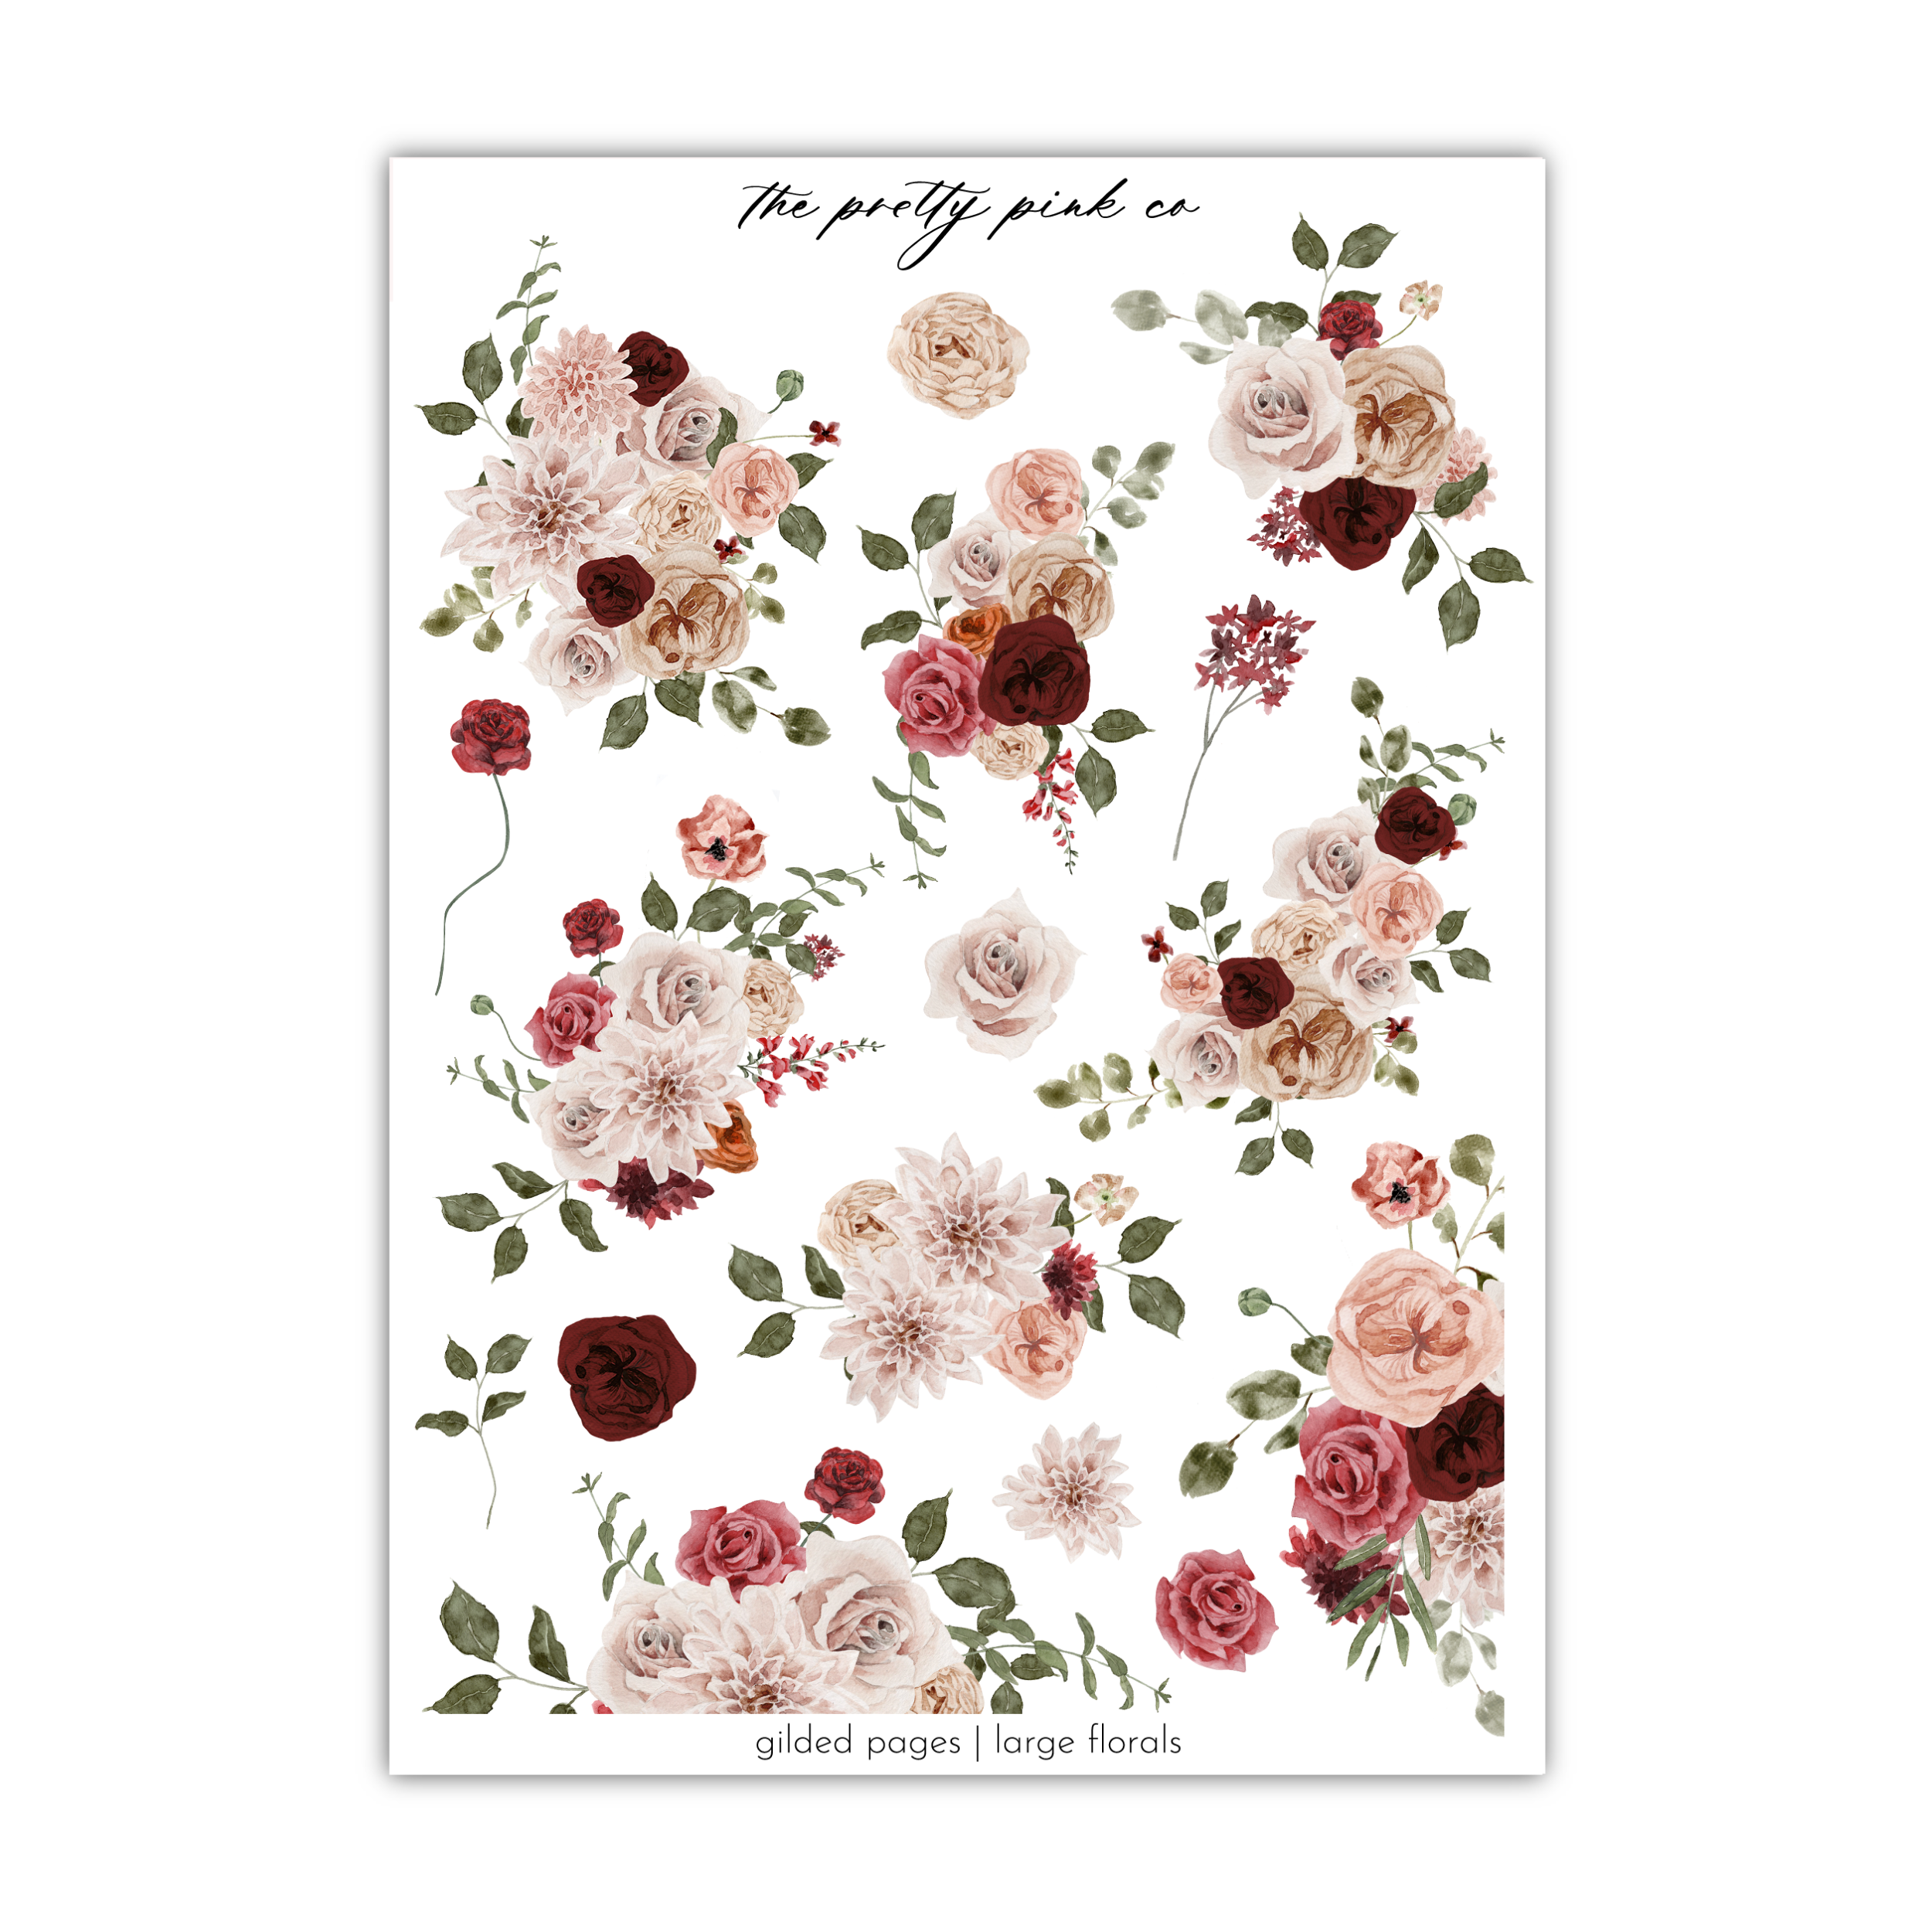 Gilded Pages | Large Florals